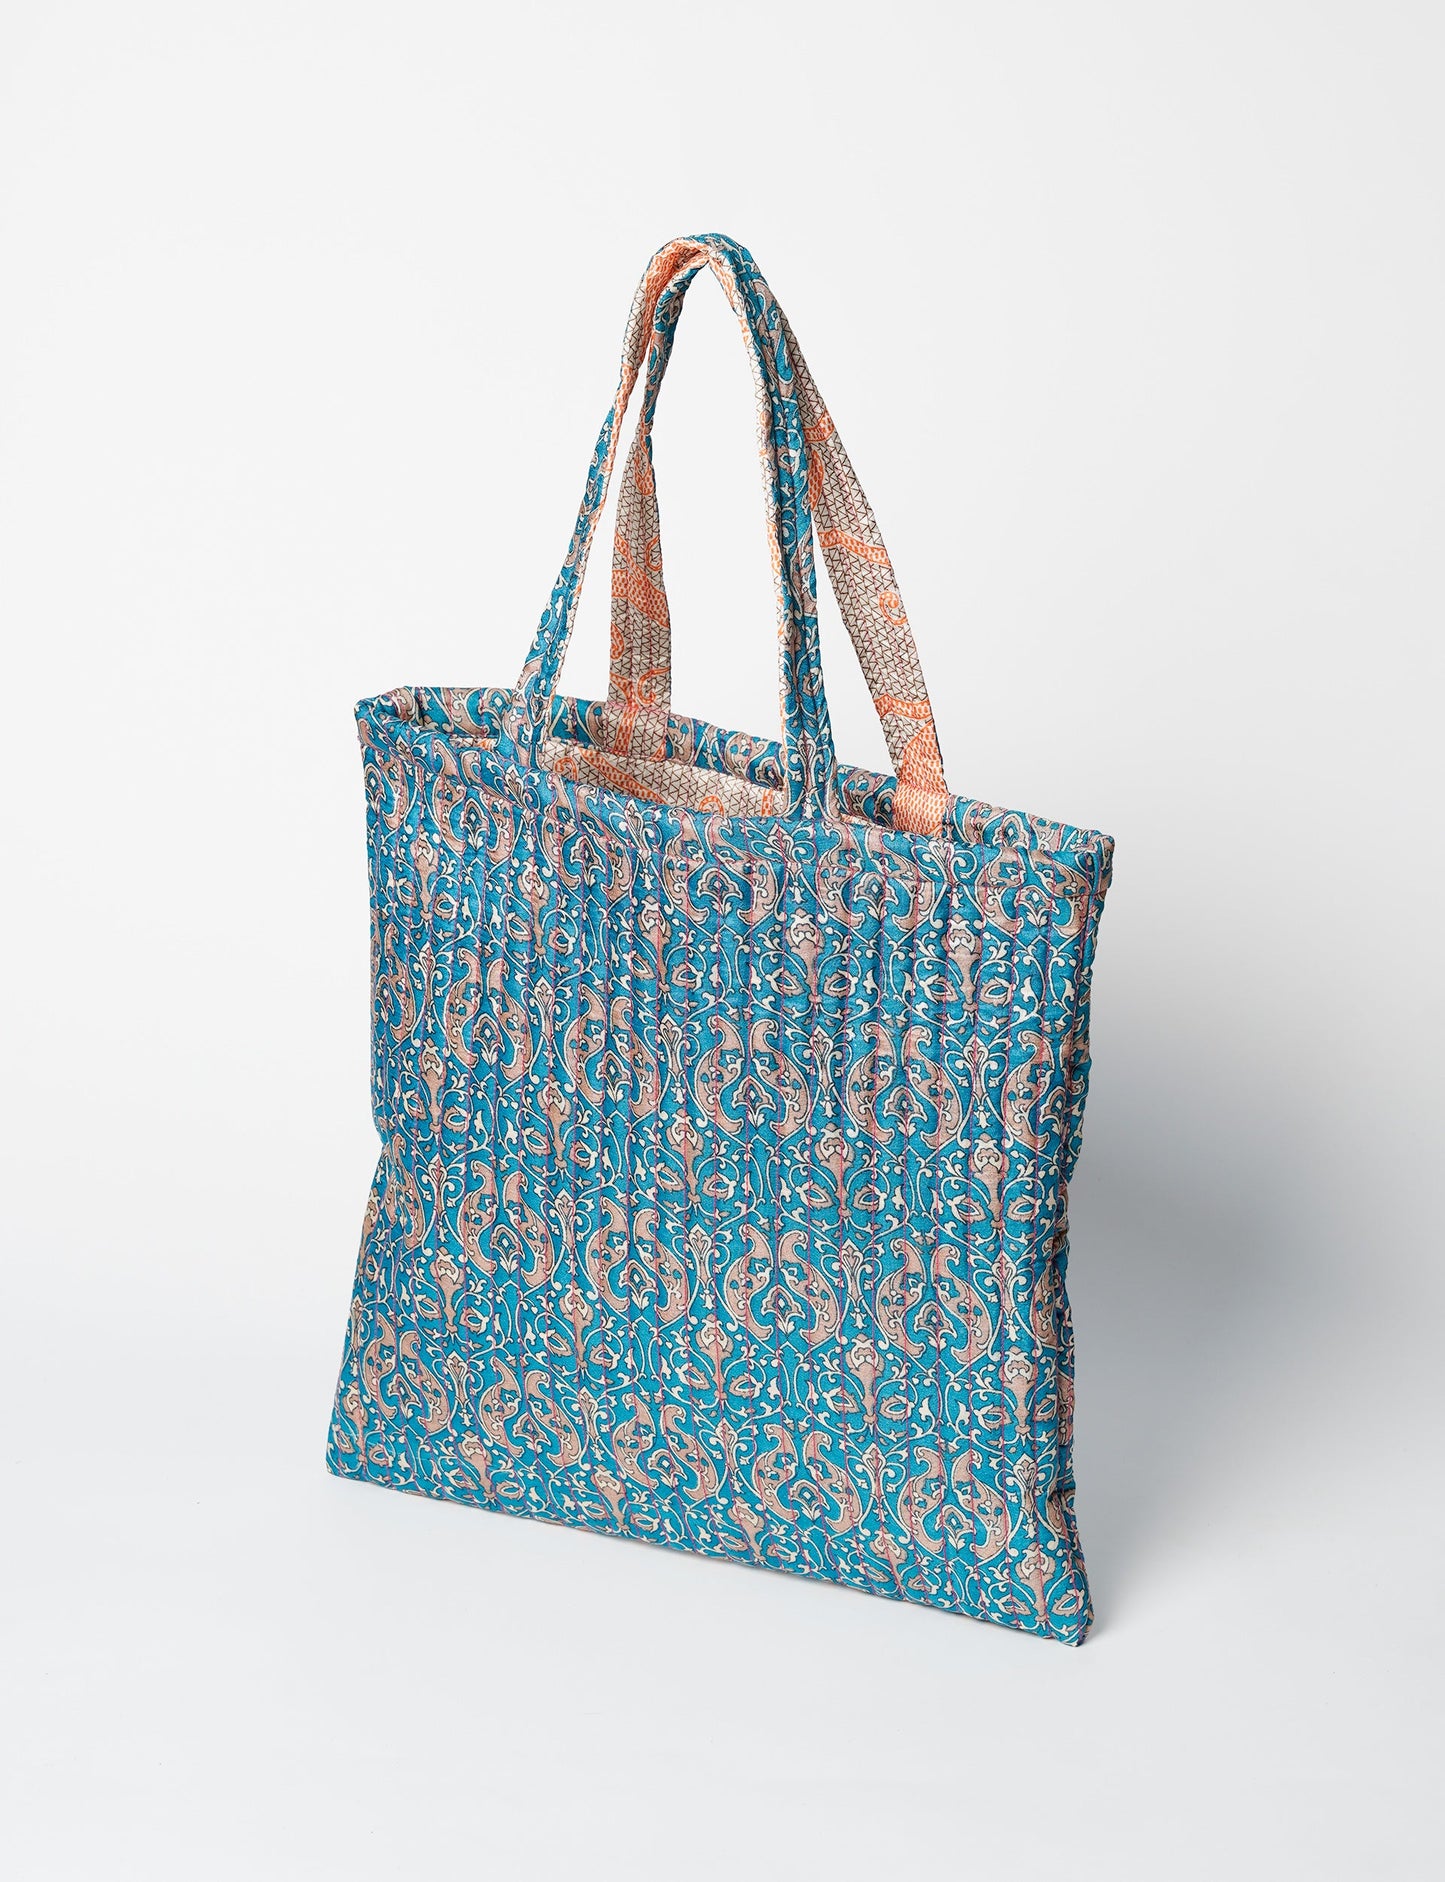 Elevate your style sustainably with our QUILTED SHOPPER BAG. Soft textures, vibrant colors, and a positive impact on people and the planet. Perfect for the office, shopping, or happy hour. Crafted from pre-loved saris for eco-conscious fashionistas!